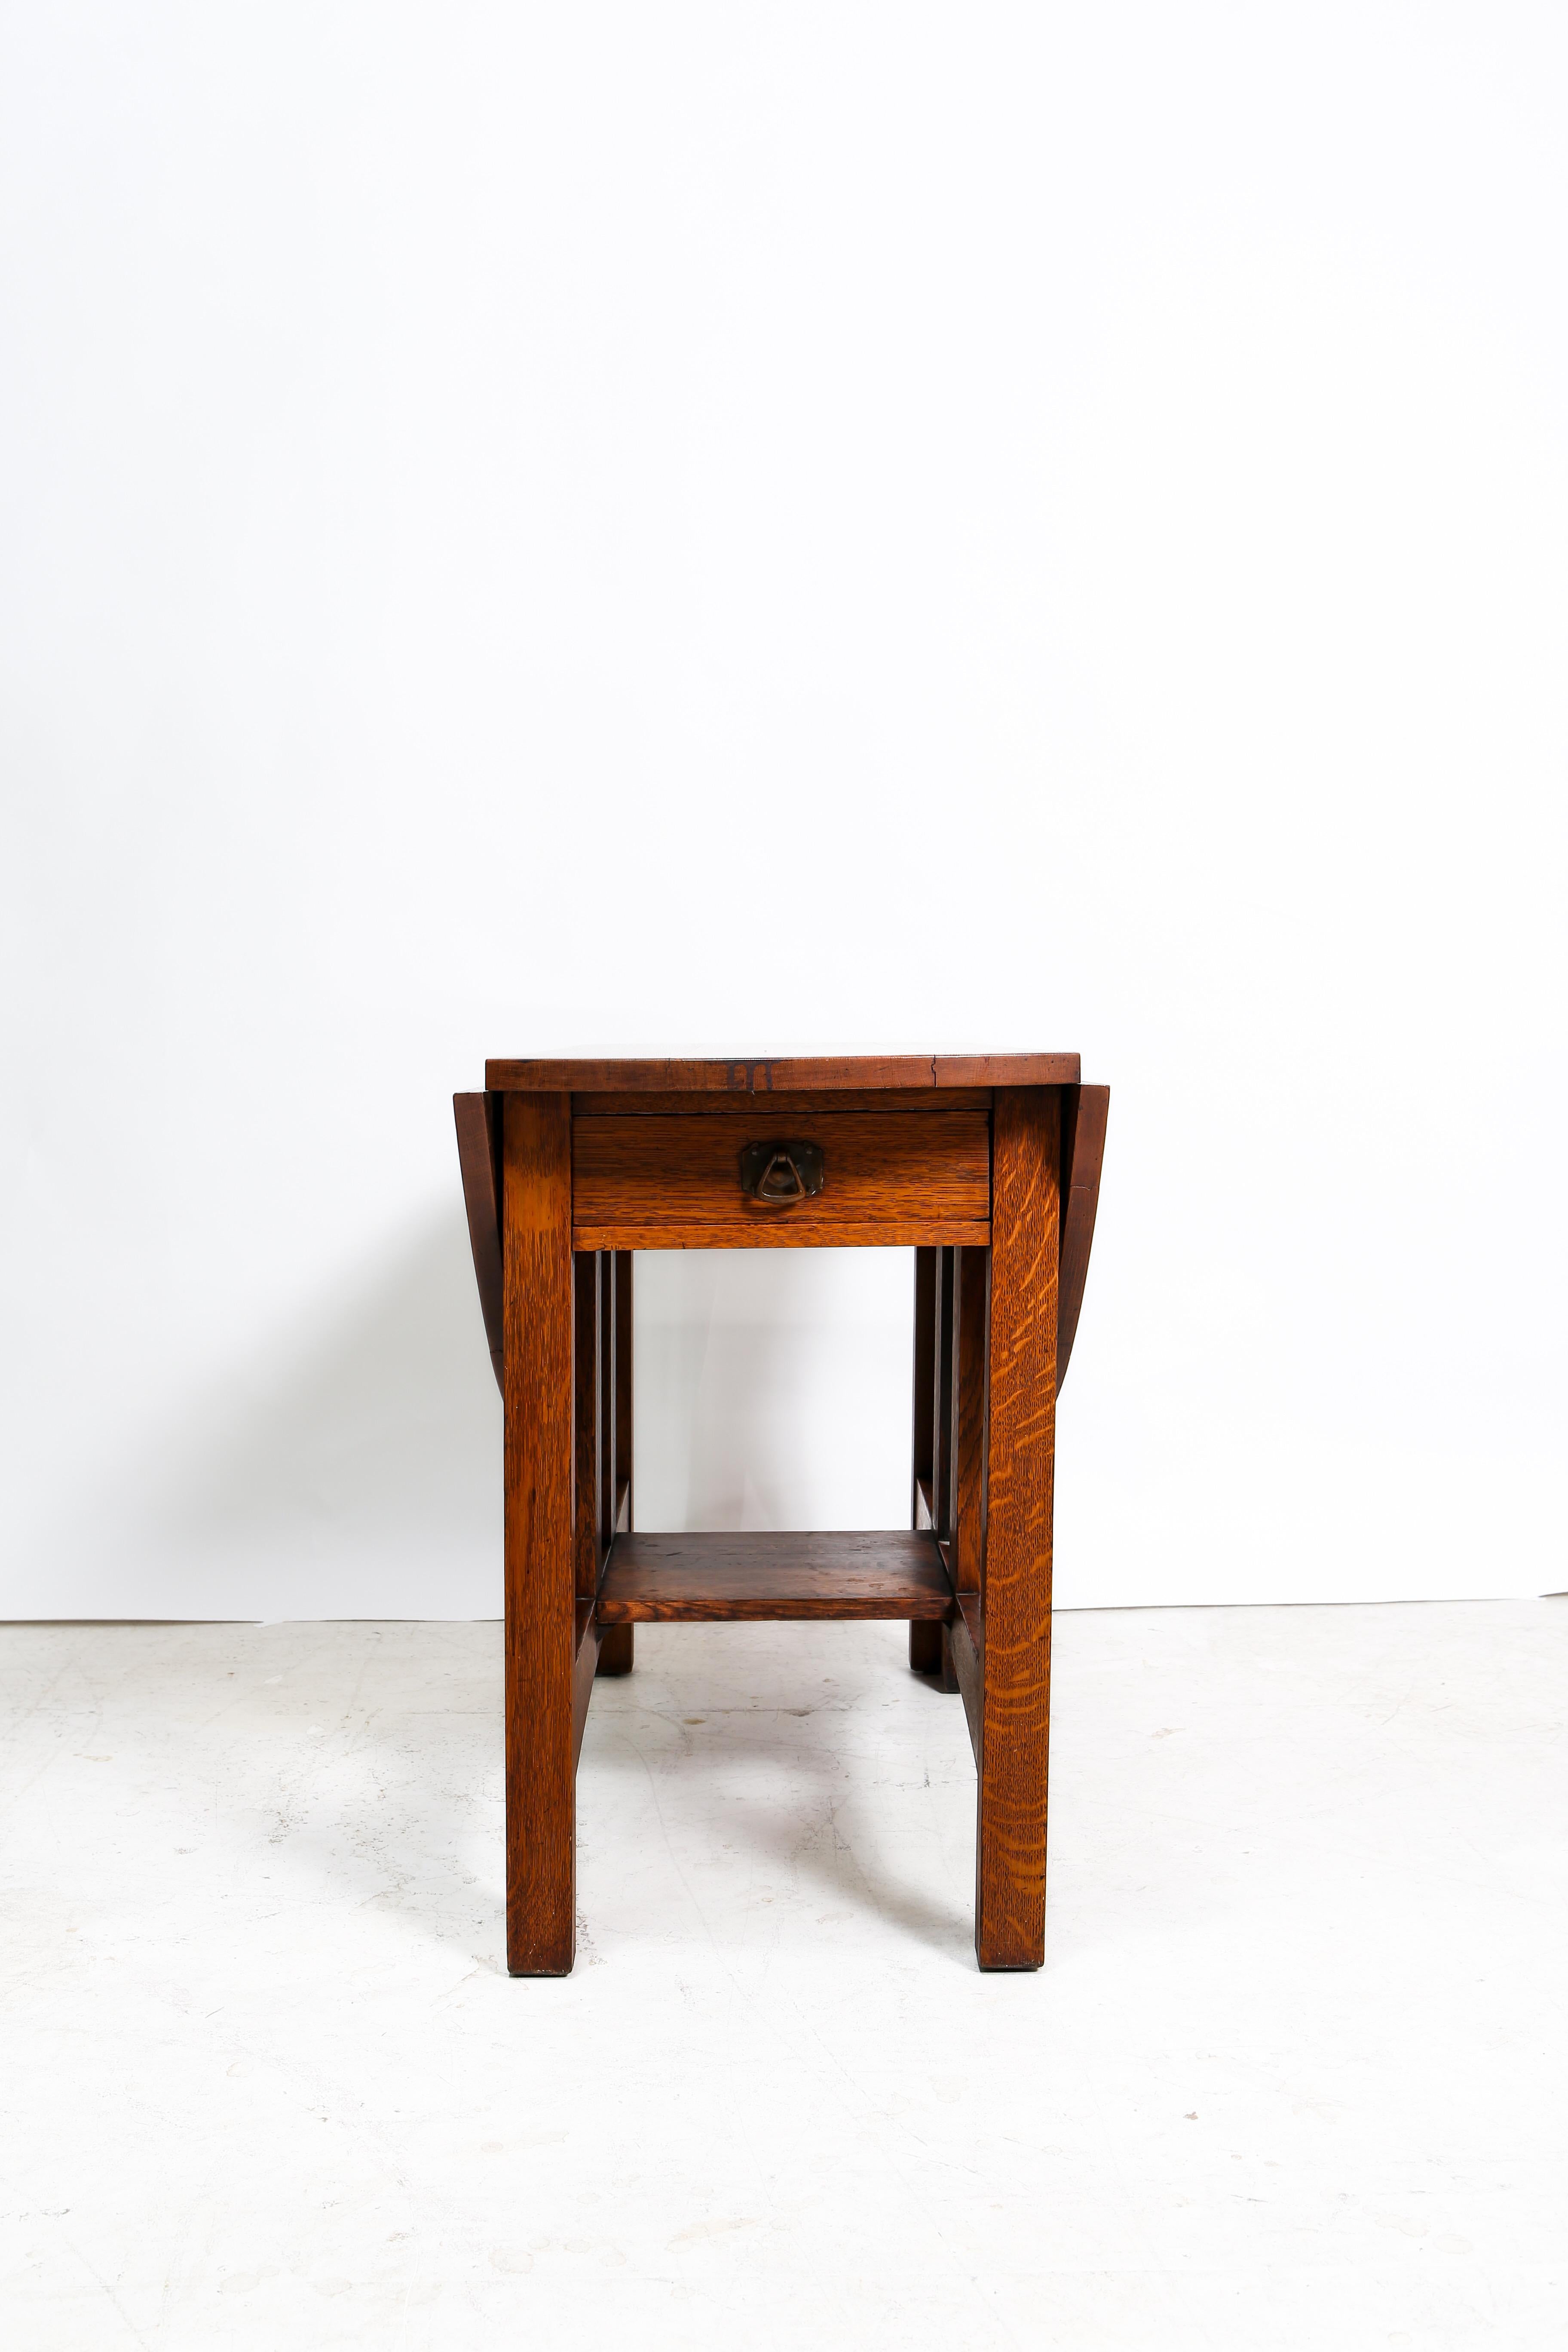 American Arts and Crafts Oak Centre table by Charles Limbert